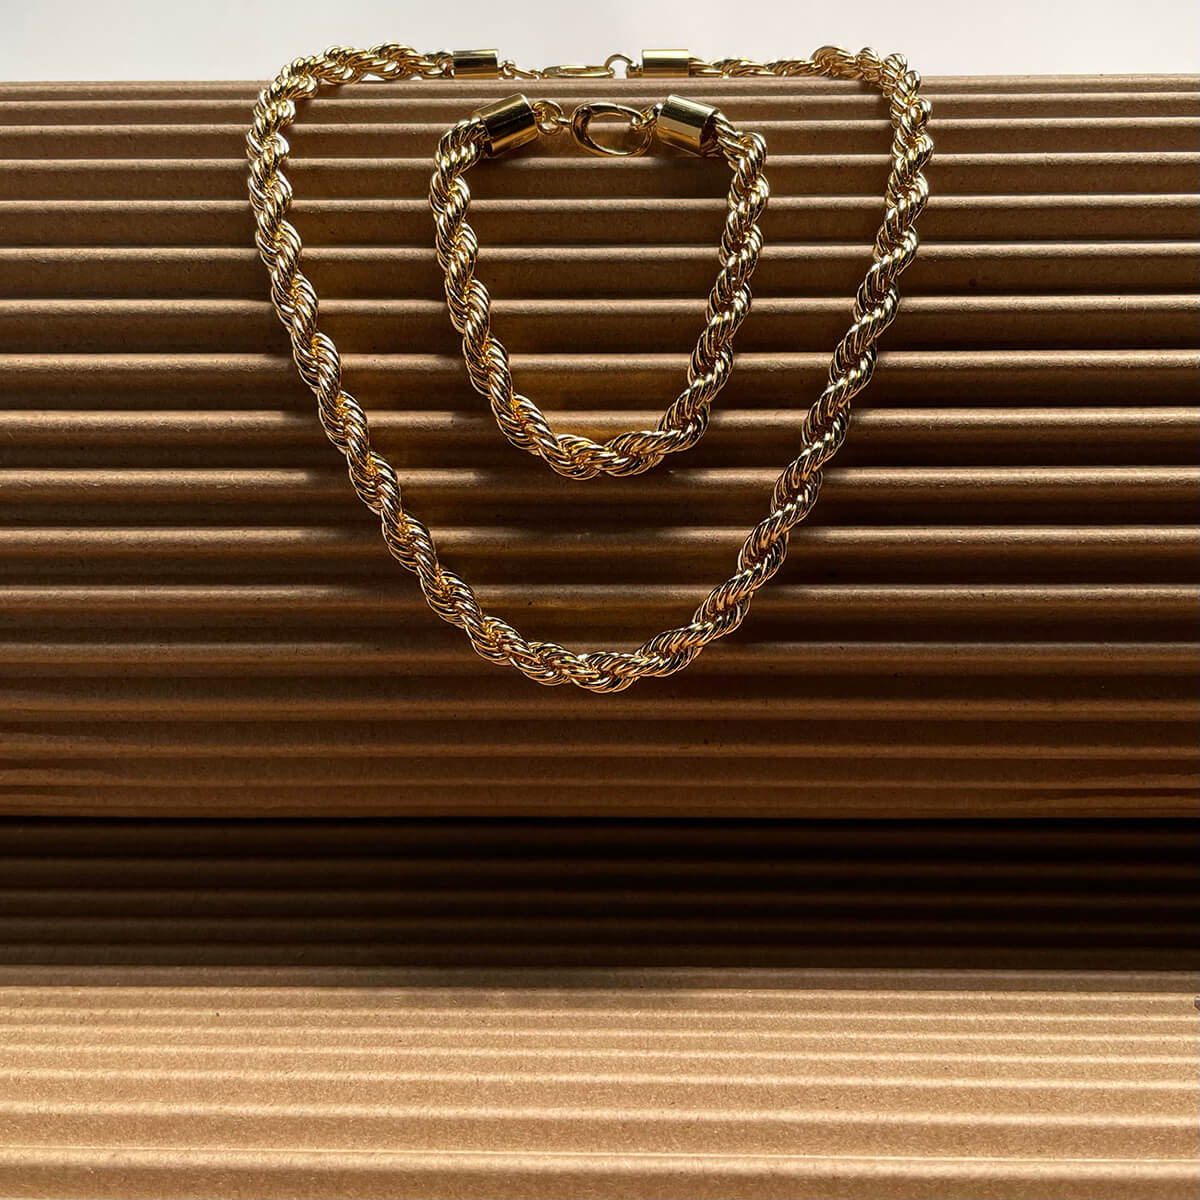 XL Rope Chain Necklace in Gold